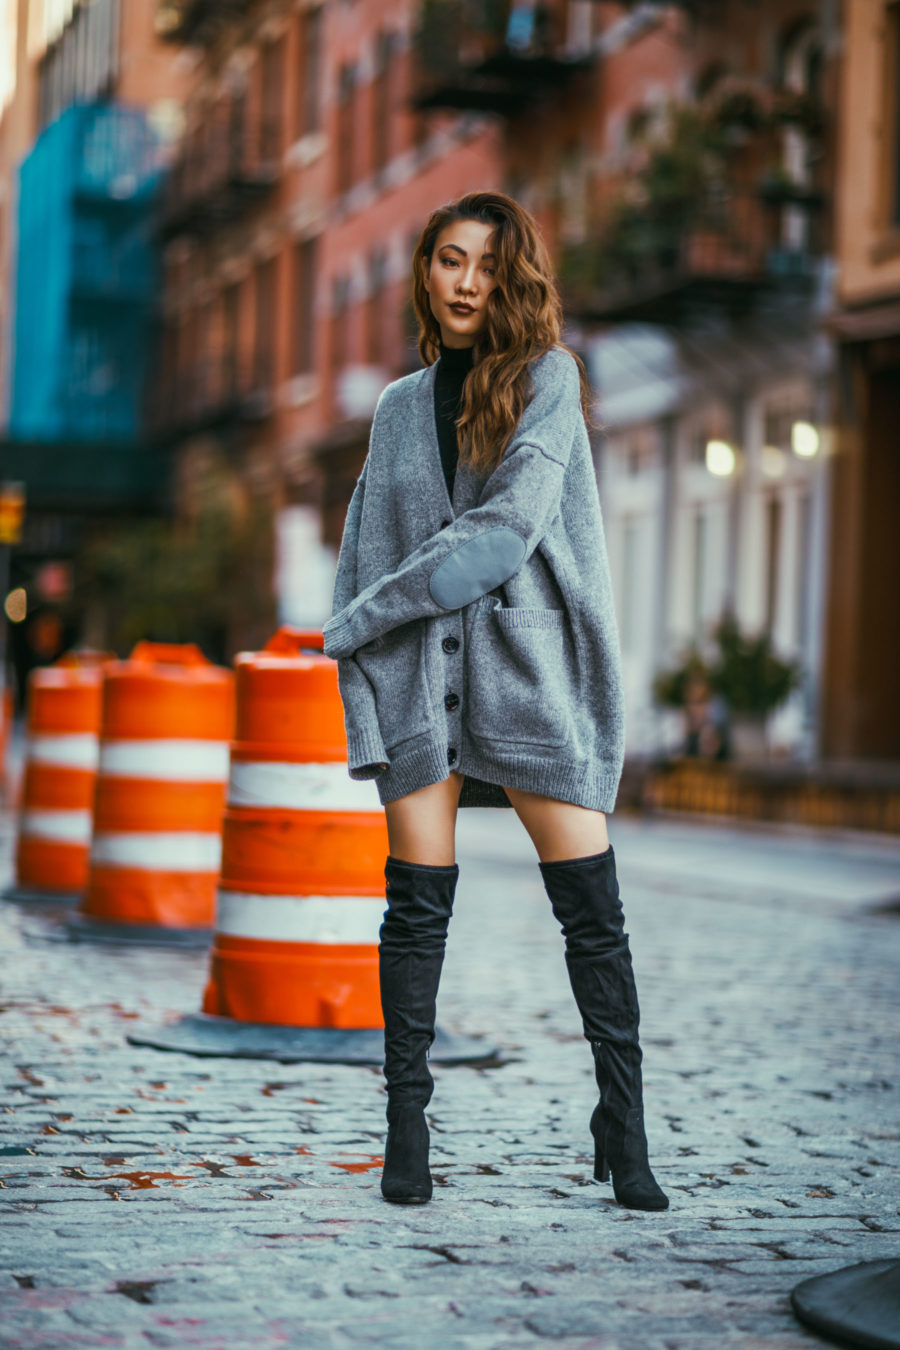 THIGHHIGH BOOTS - Tips for Styling Thigh High Boots - DSW thigh high boots// Notjessfashion.com